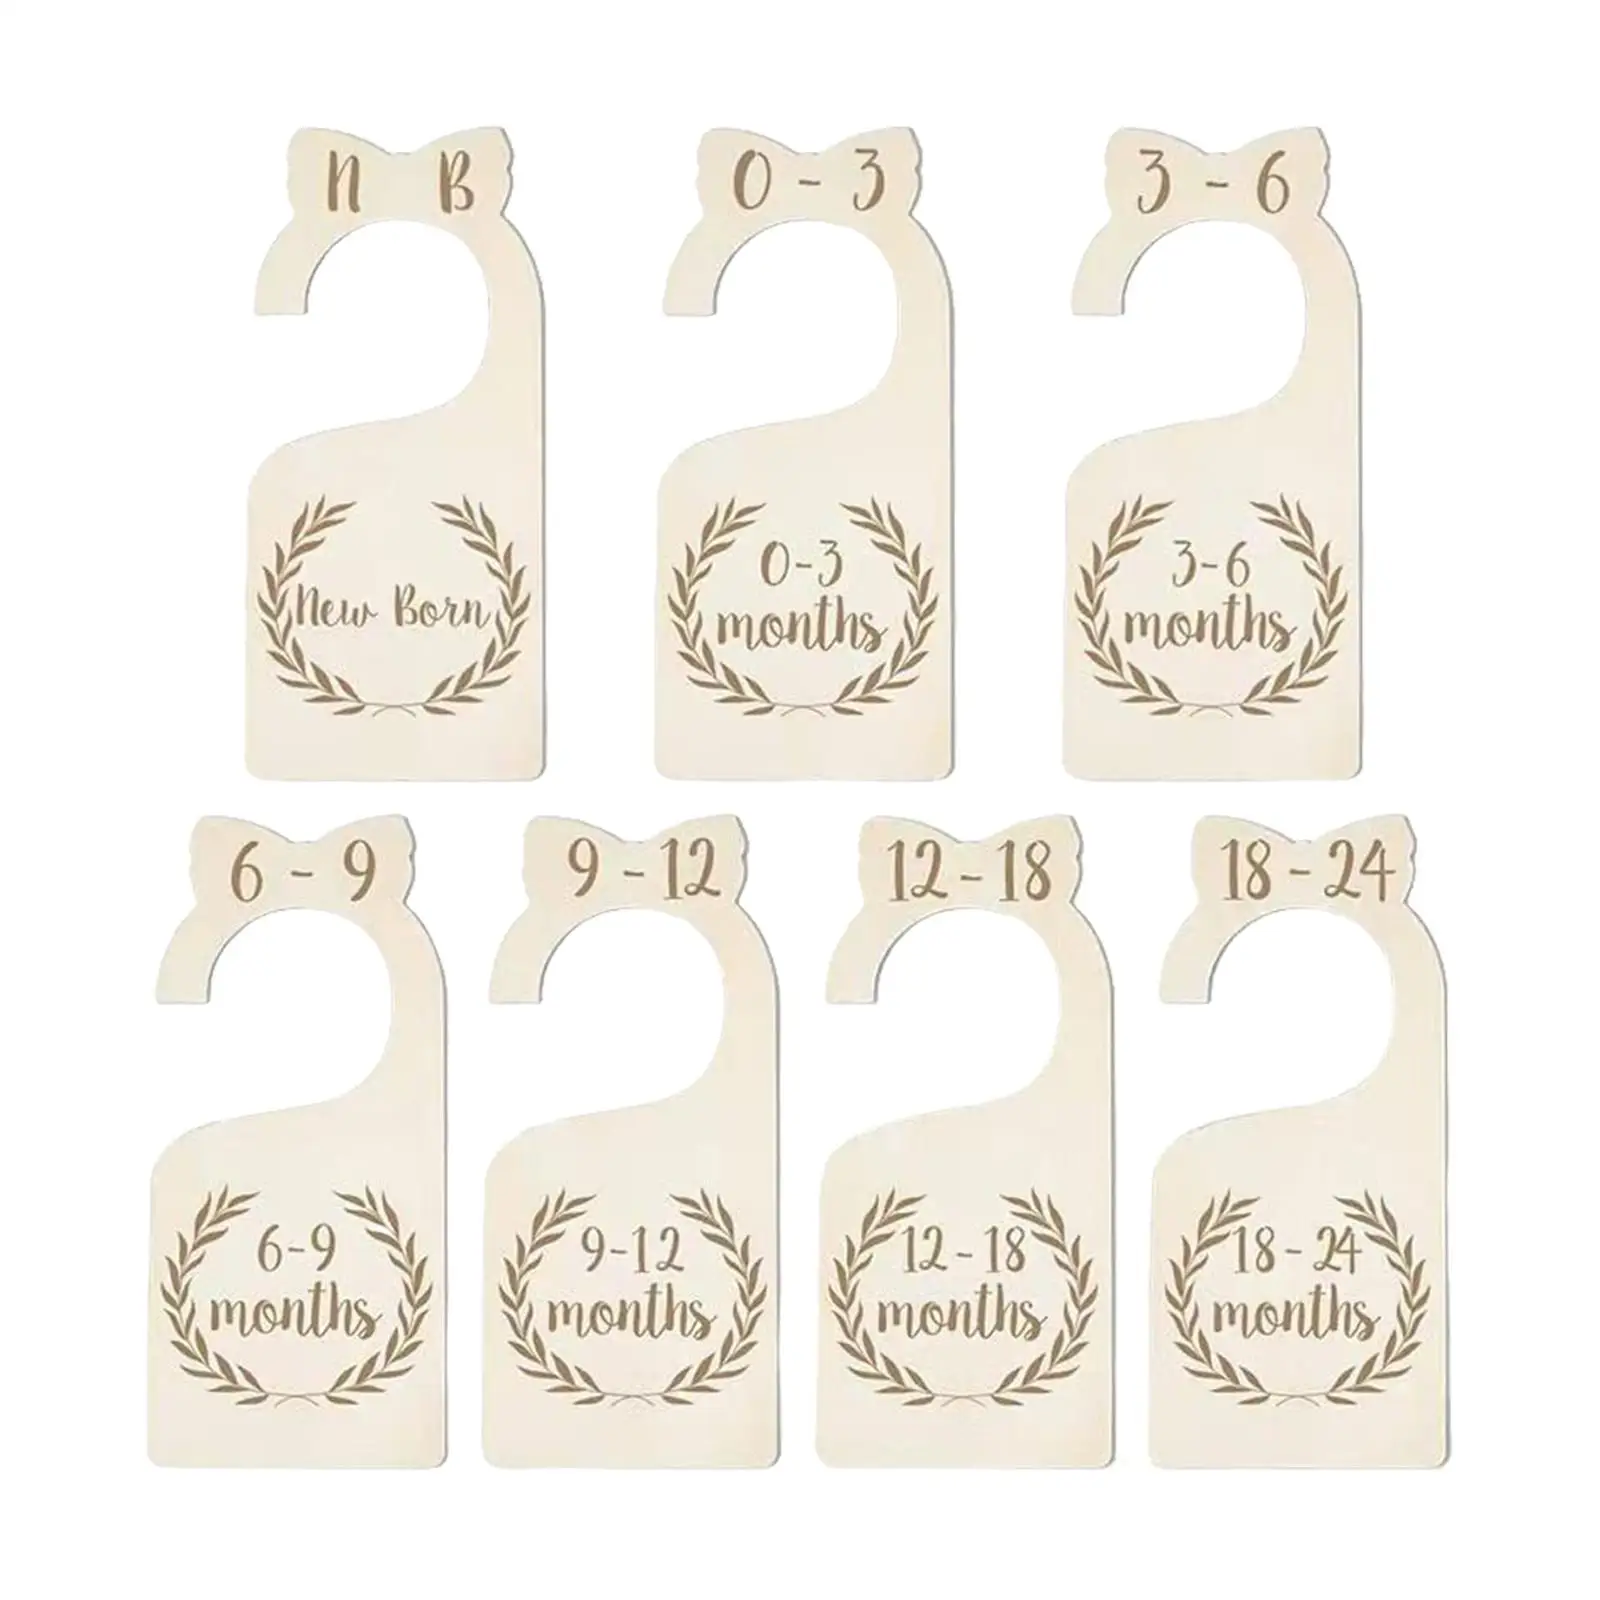 7 Pieces Baby Closet Dividers Clothes Sorting Tags Nursery Closet Organizers Baby Clothes Size Hanger Organizer for Daily Use